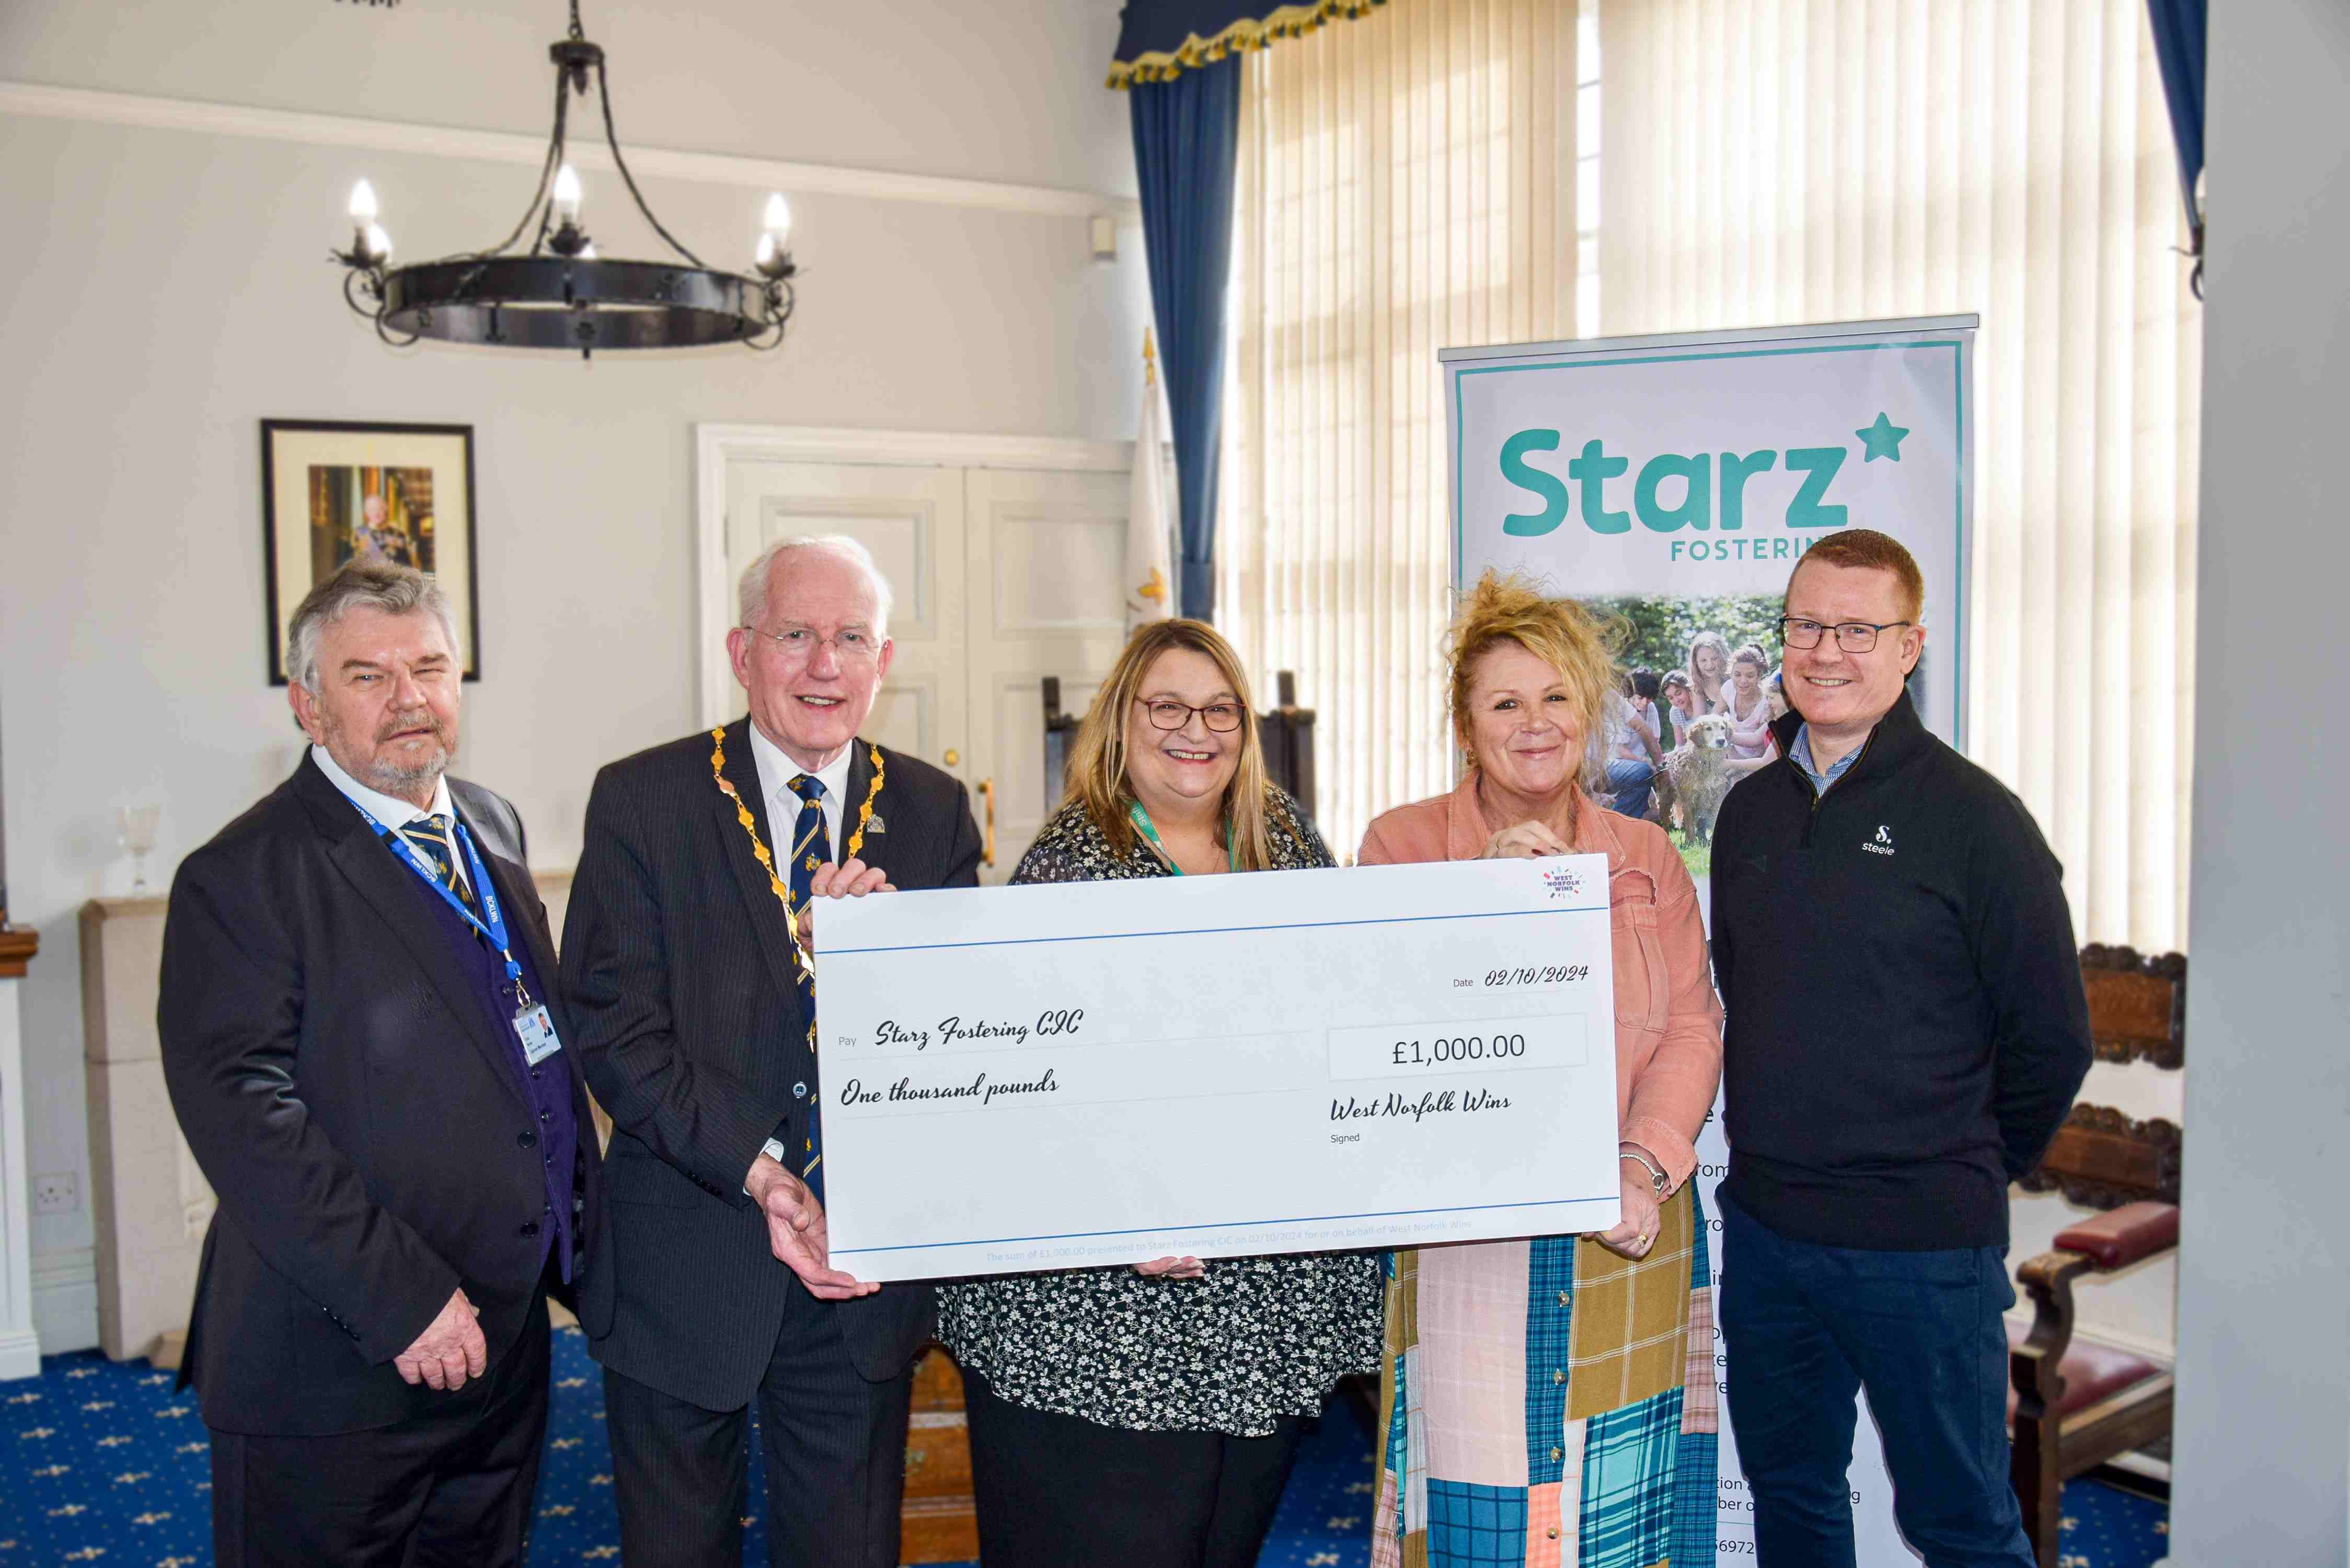 From left to right: Cllr Chris Morley, Deputy Mayor Cllr Paul Bland, Nicky Starenczak, Lisa Whiting, Gary Pooley.